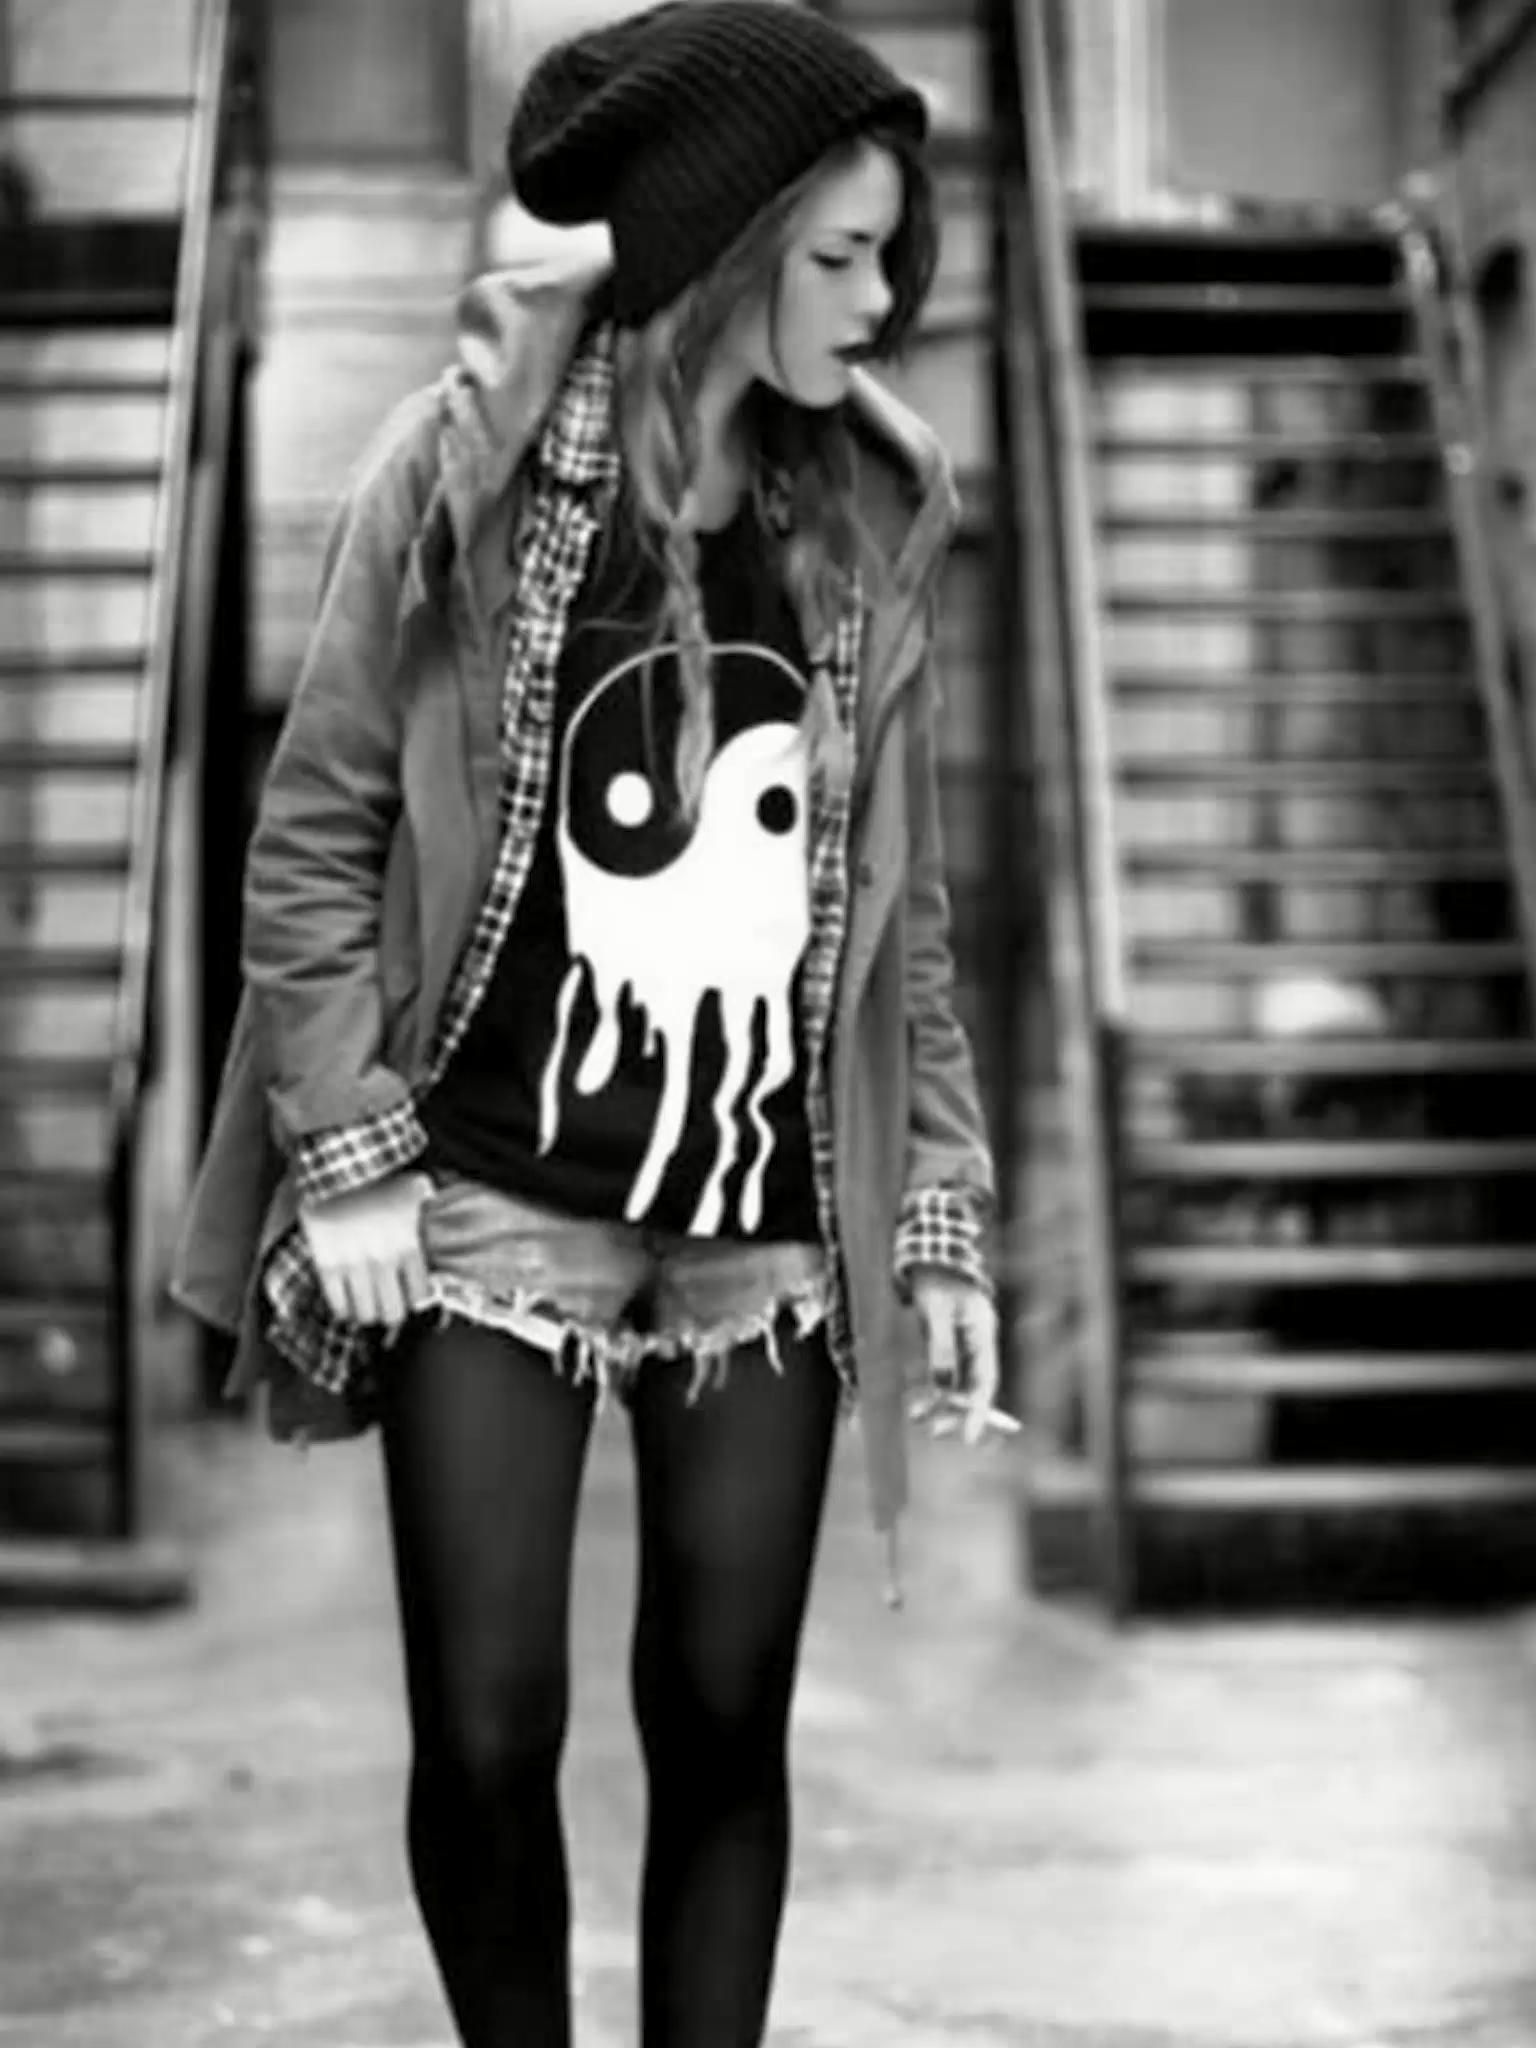 Cool and Edgy Grunge Outfits - Cool and Edgy Grunge Outfits -   24 style Grunge videos ideas